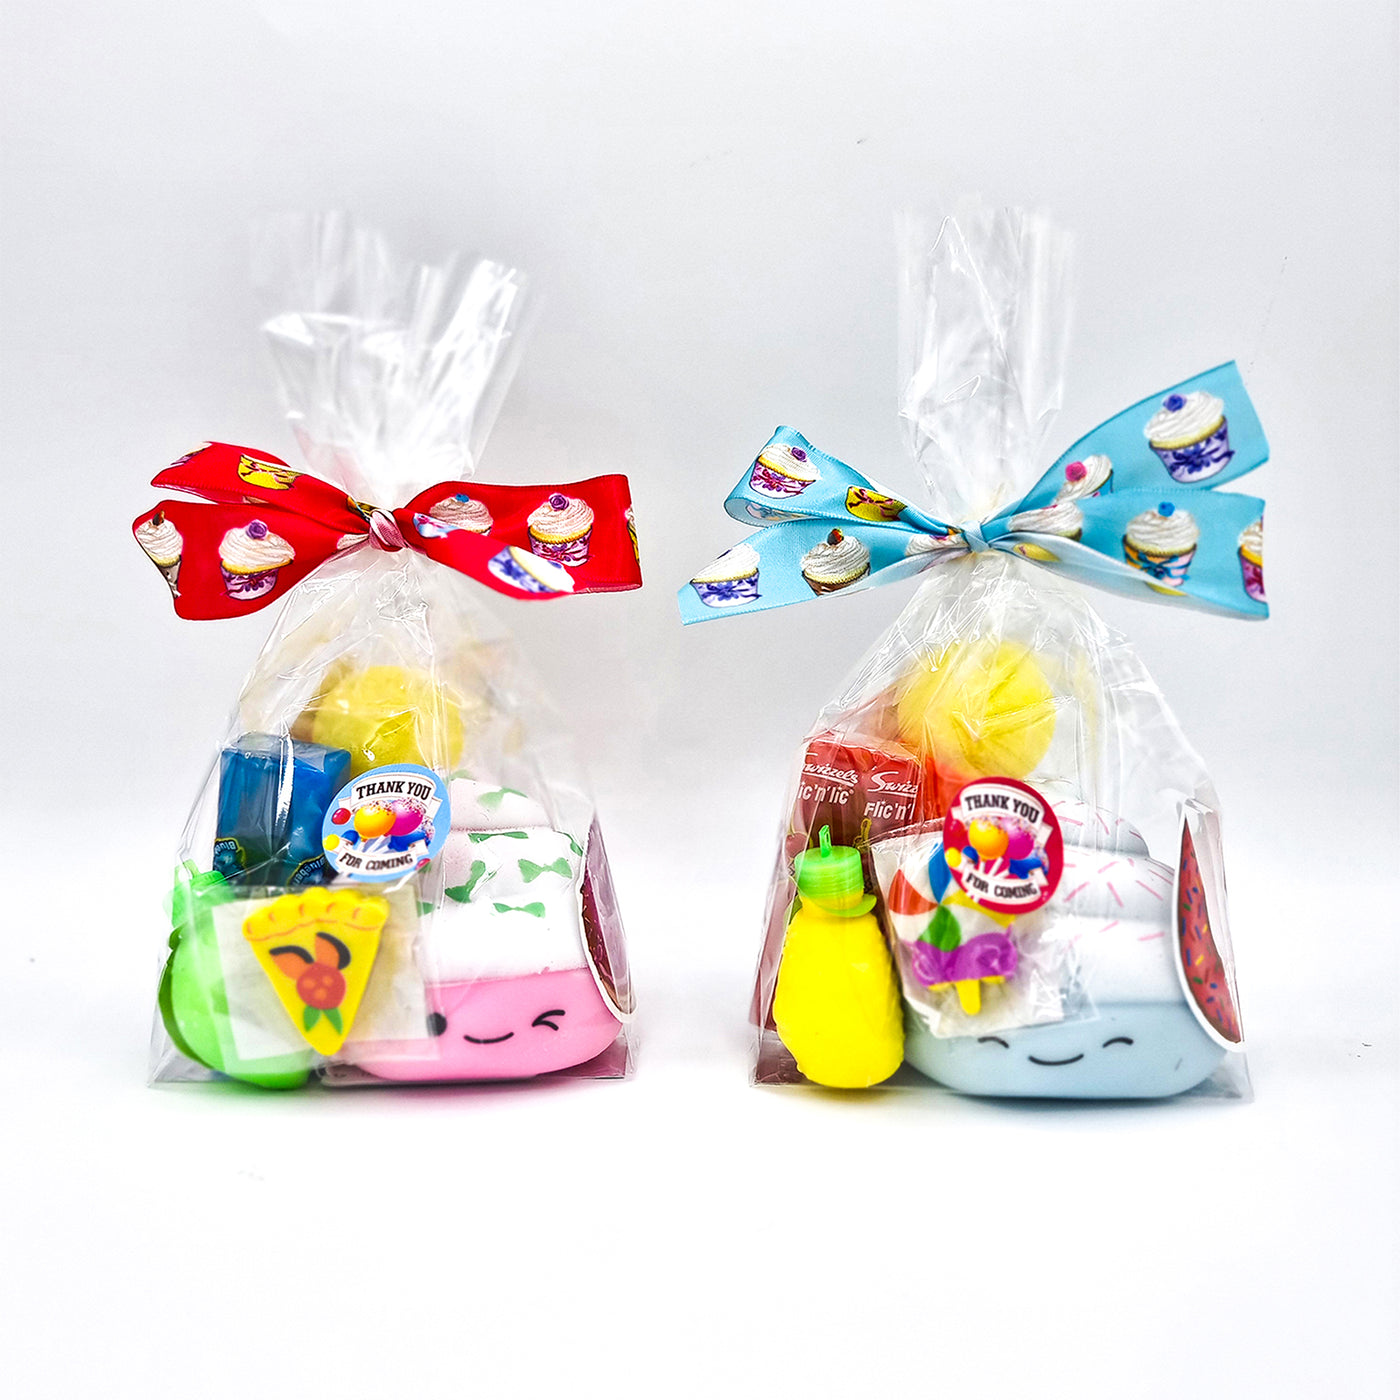 Pre Filled Cupcake Birthday Party Goody Bags With Toys And Candy For Boys And Girls, Party Favours.